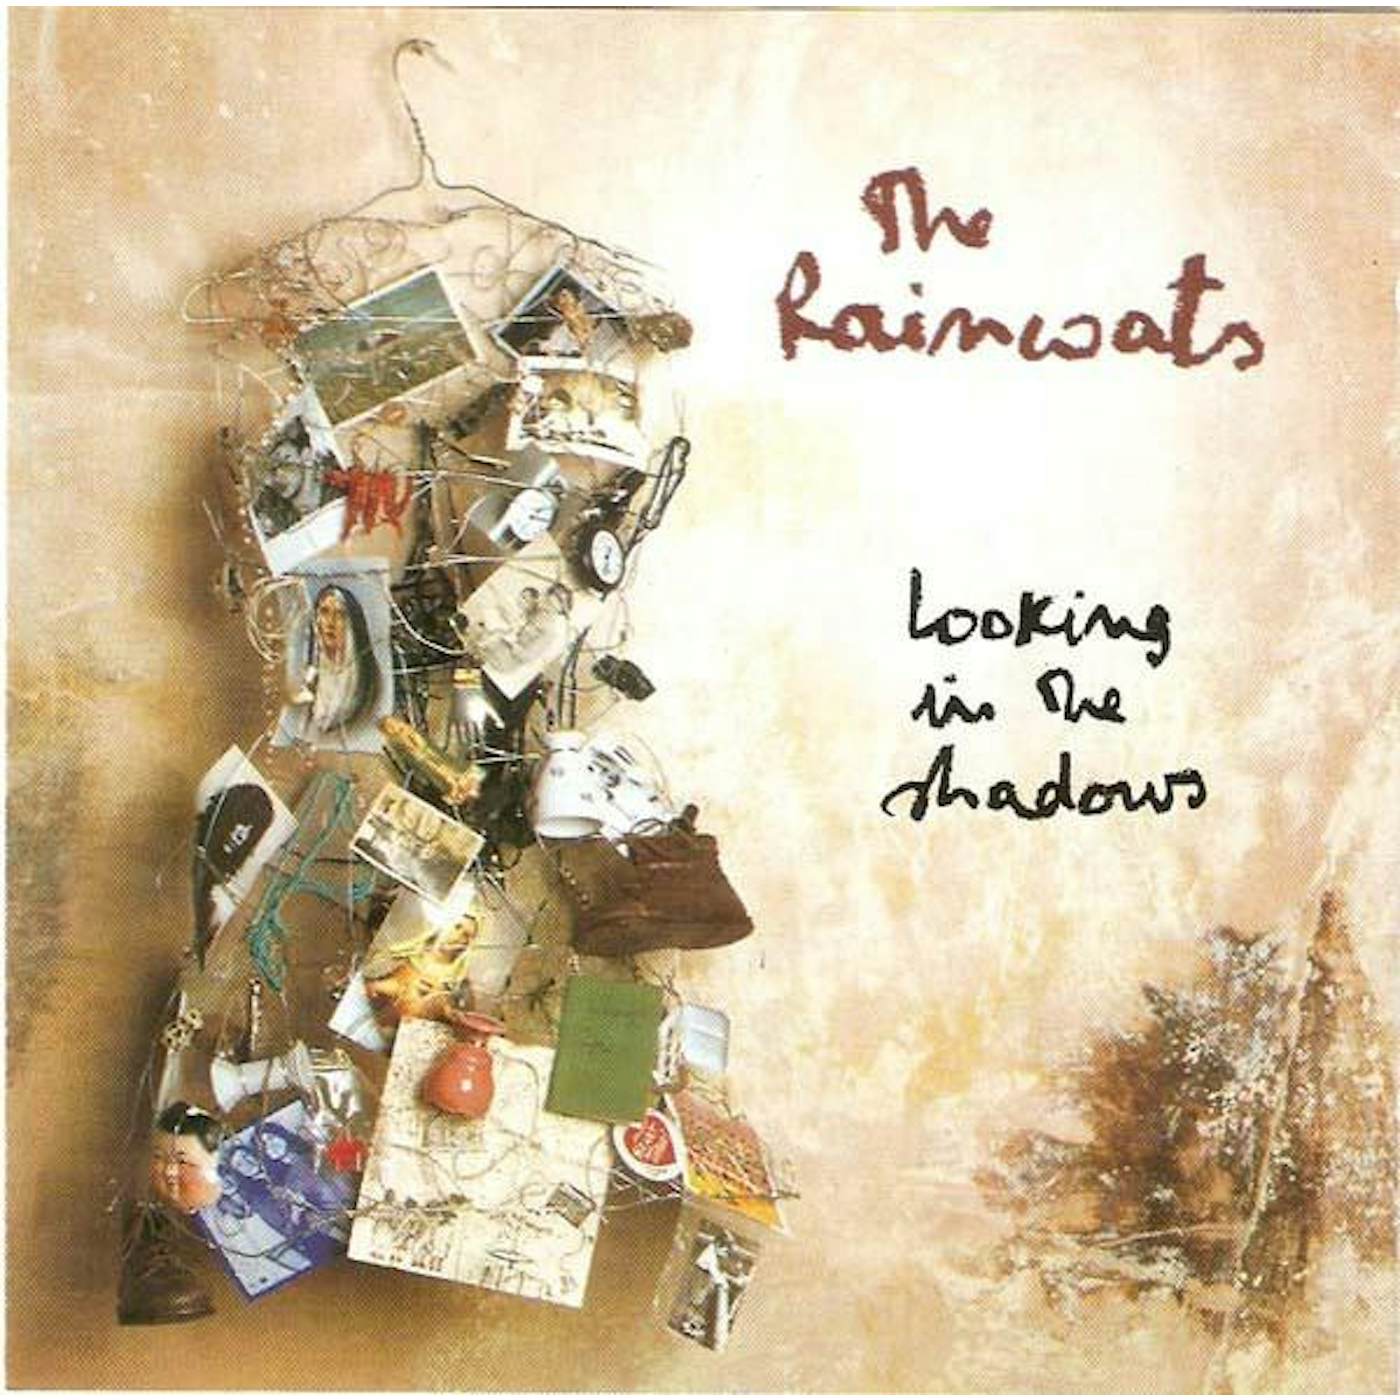 The Raincoats LOOKING IN THE SHADOWS CD